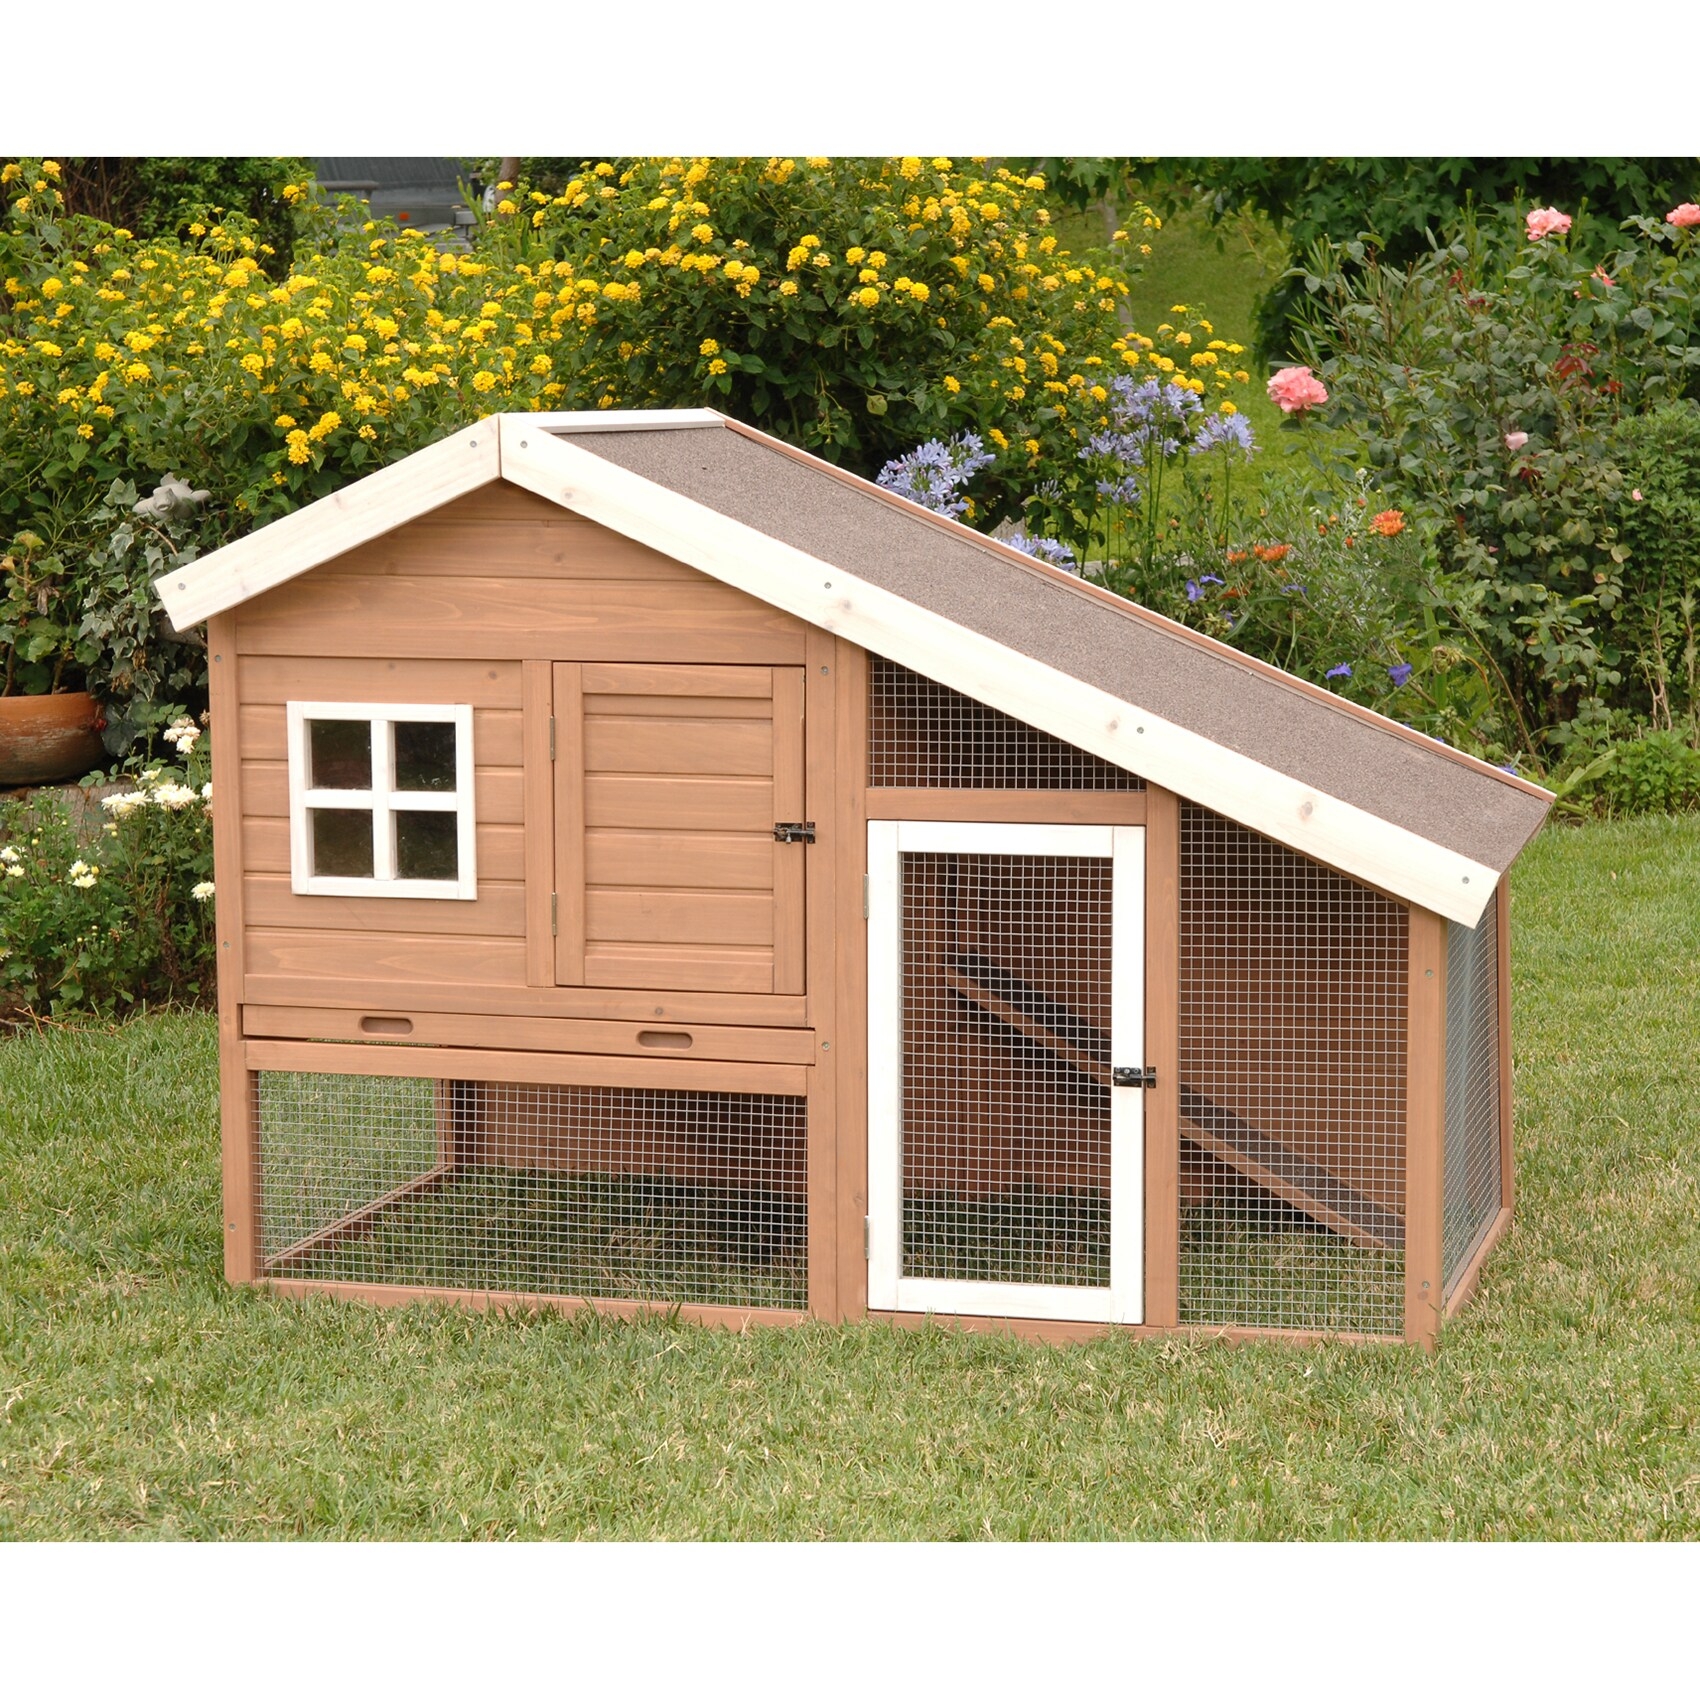 Chicken house for sale 13